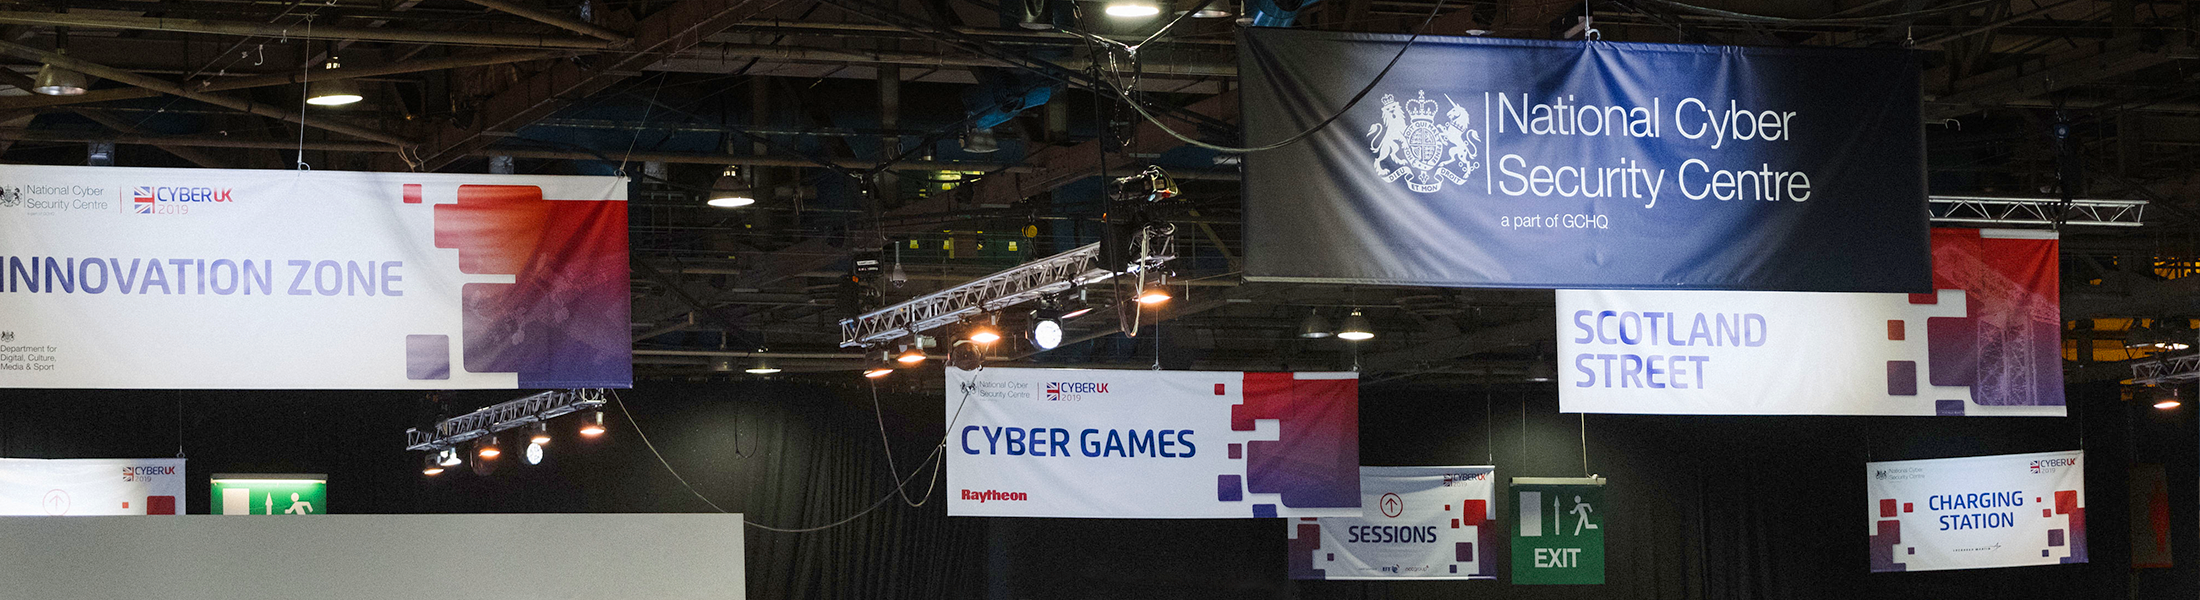 Directive banners hanging from ceiling at previous CYBERUK event